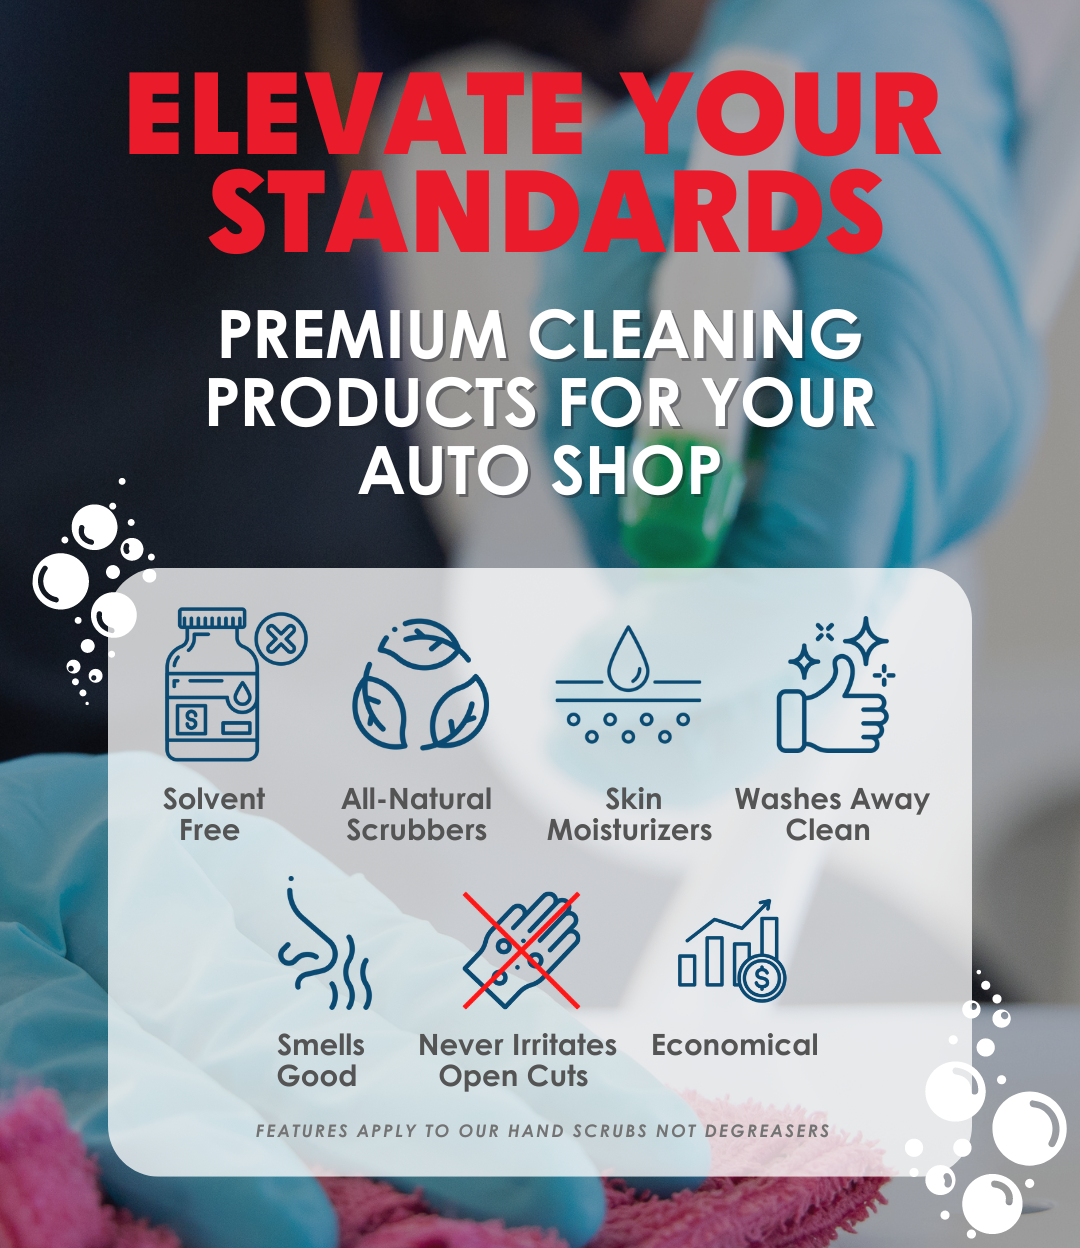 Elevate Your Standards - Premium Cleaning Products for Your Auto Shop